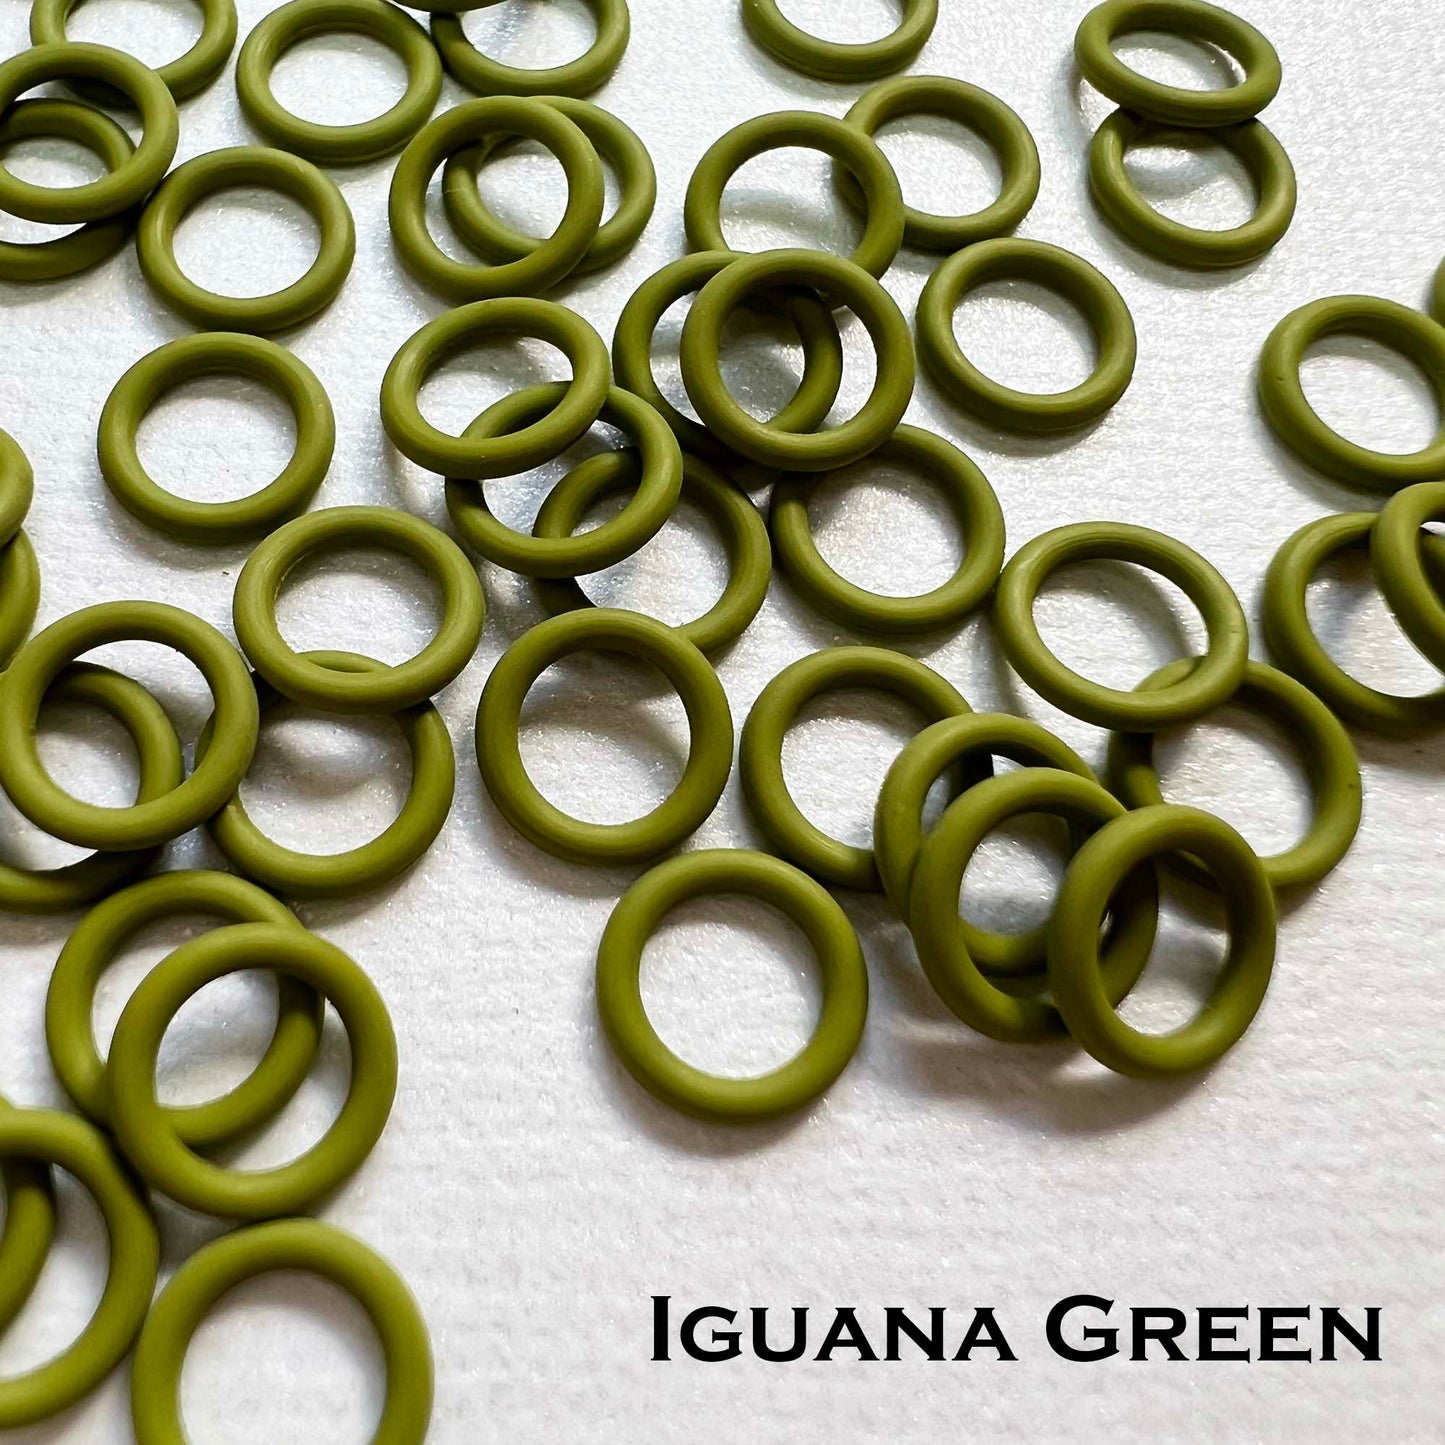 7.4mm Rubber O-Rings (ID: 5mm) - choose color & quantity